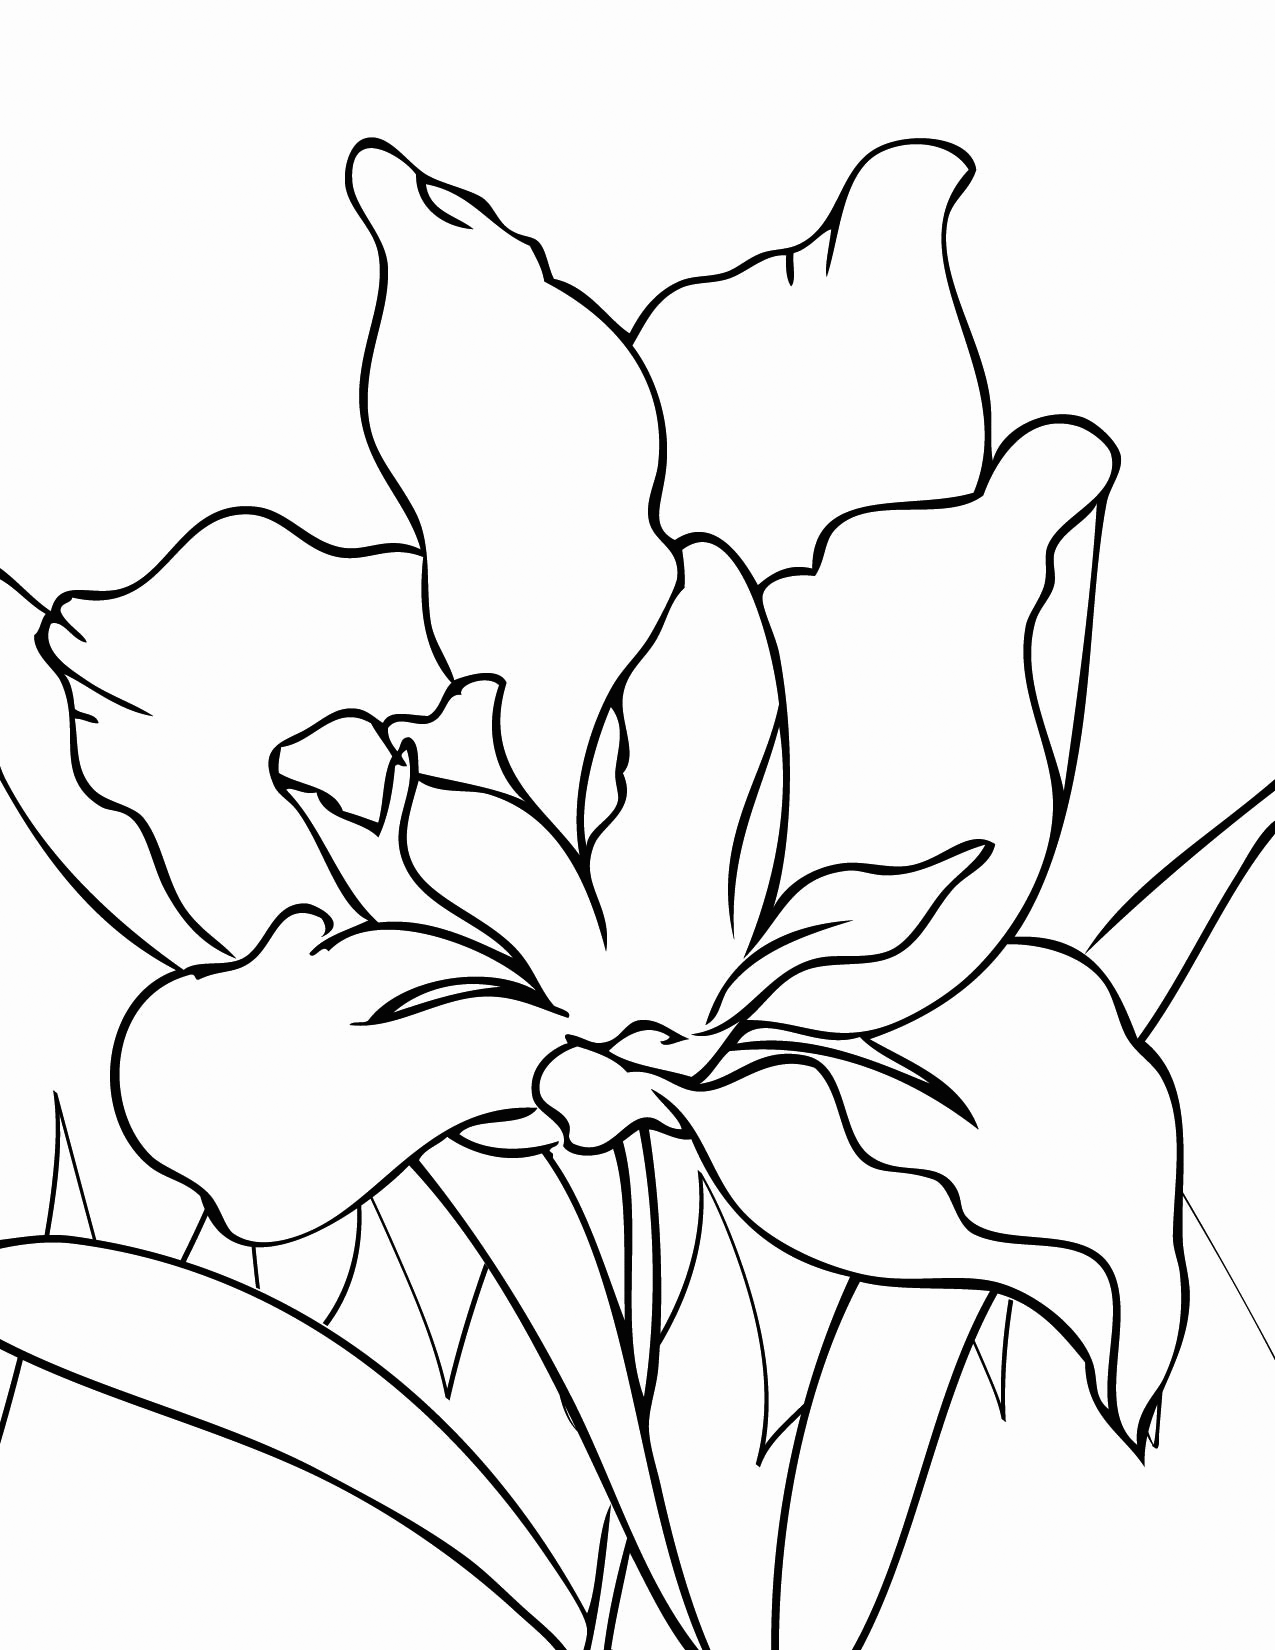 Best Coloring Pages For Kids   And Adults, too